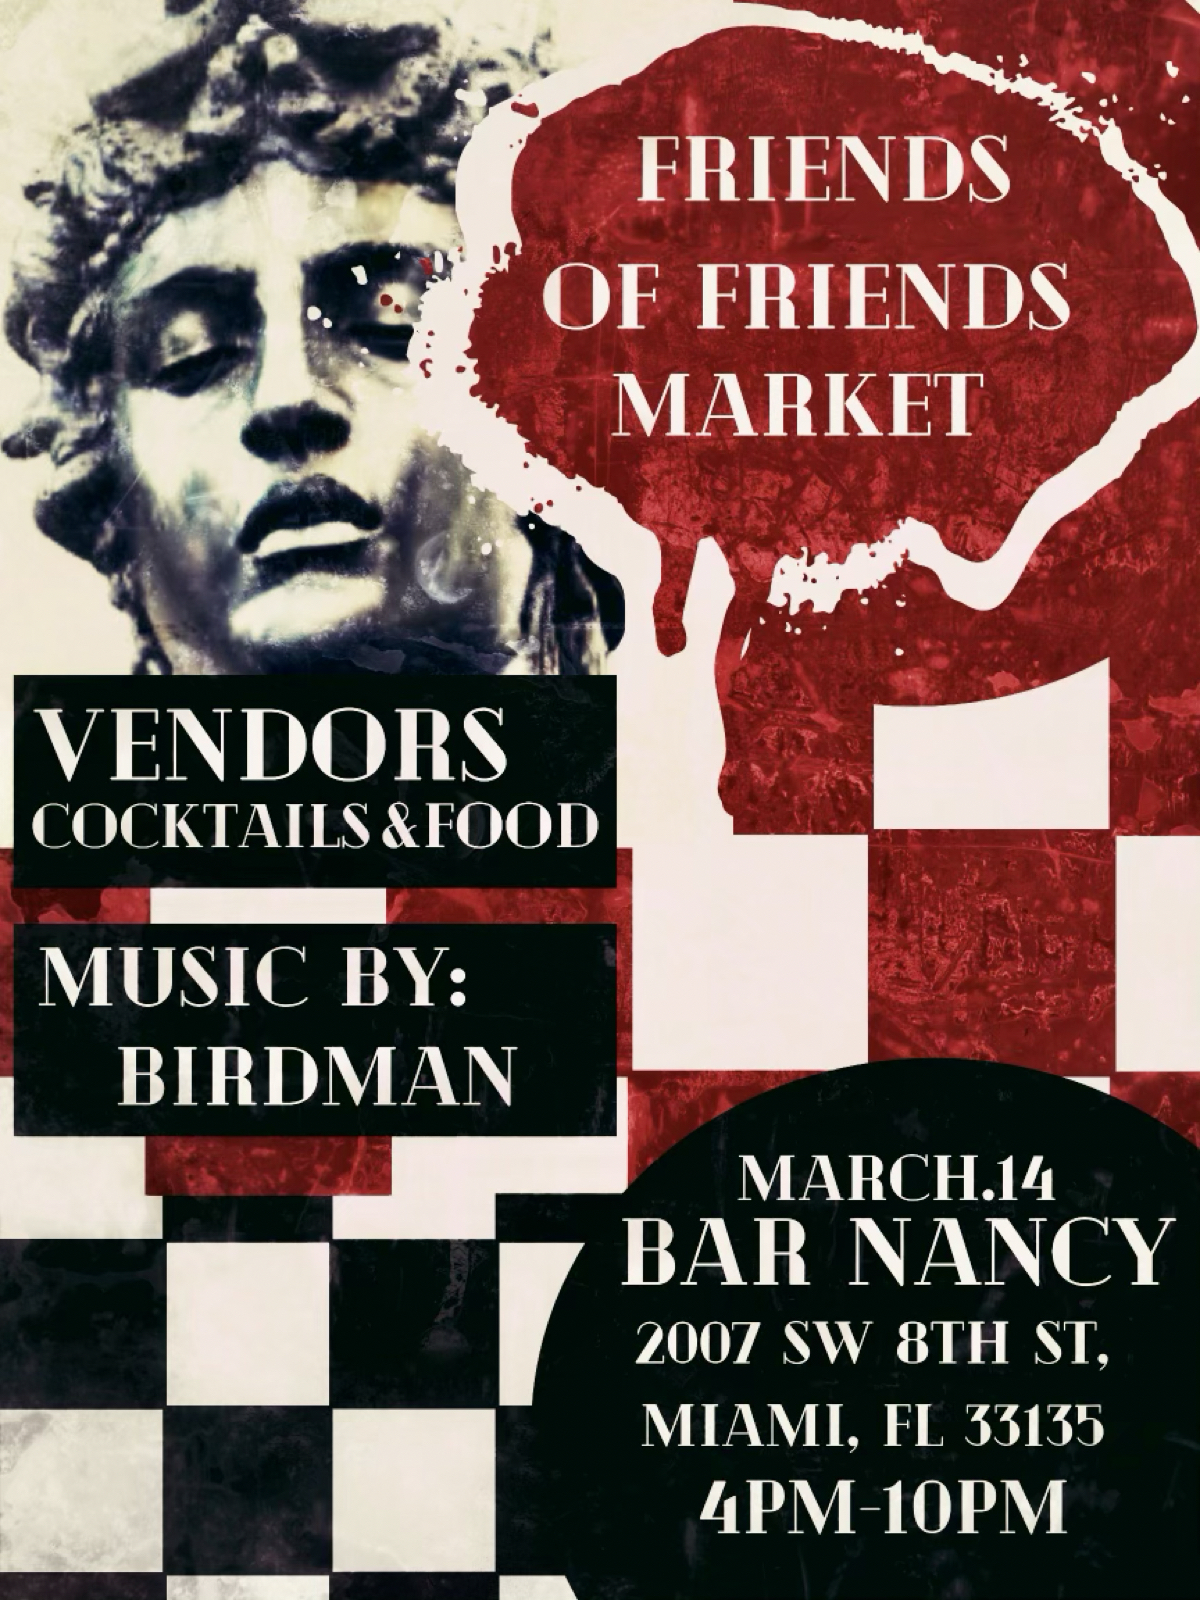 Friends of Friends Market at Bar Nancy - Music by Birdman - March 14 at 4PM